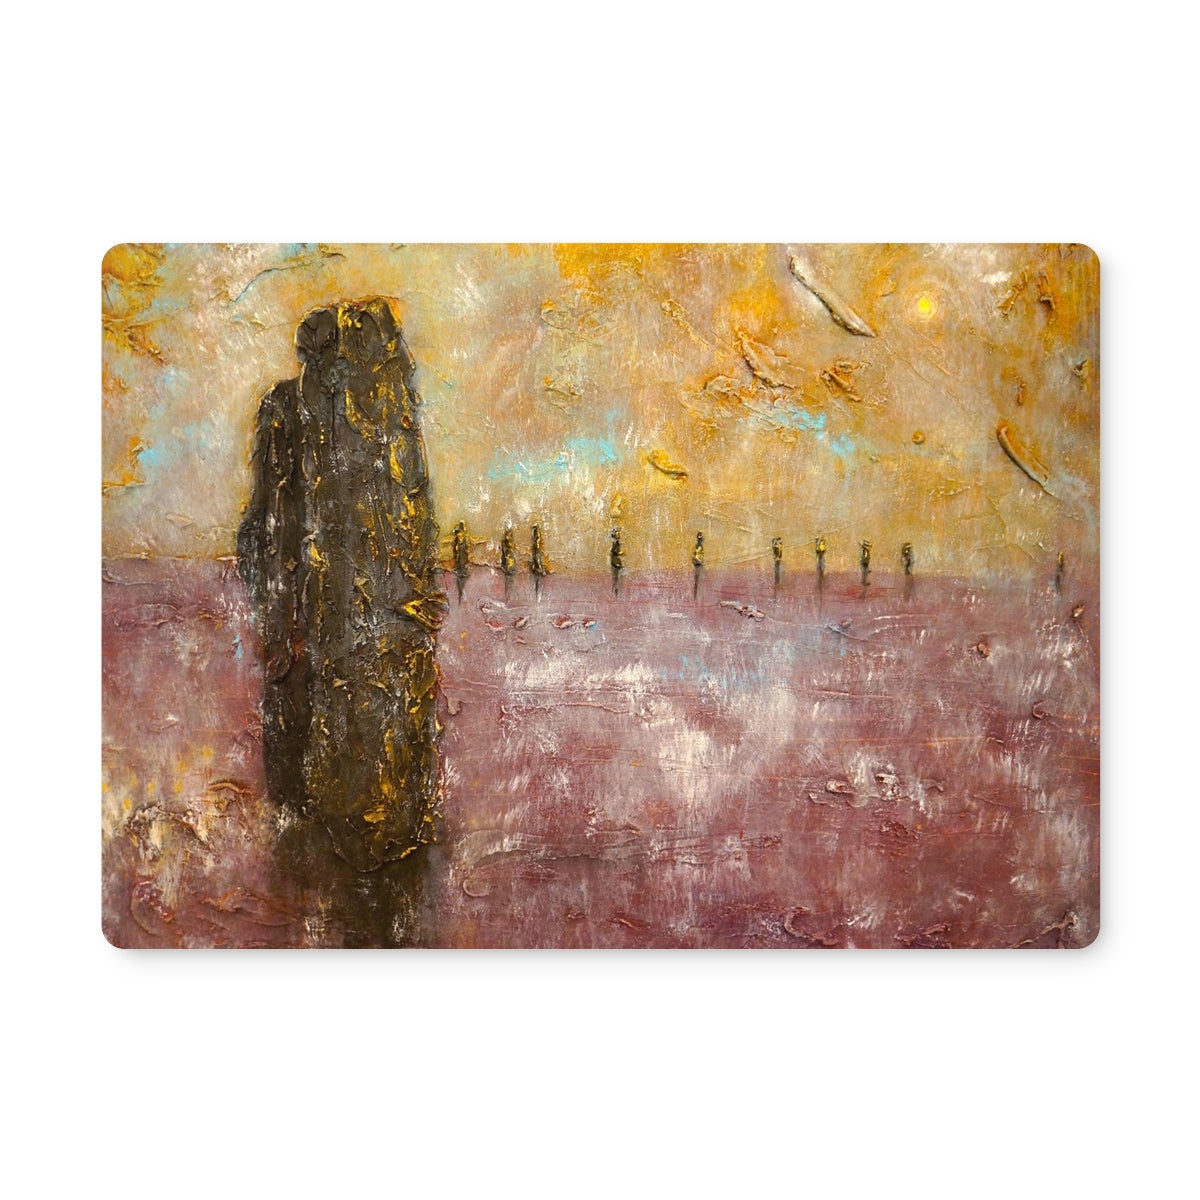 Brodgar Mist Orkney Art Gifts Placemat-Placemats-Orkney Art Gallery-6 Placemats-Paintings, Prints, Homeware, Art Gifts From Scotland By Scottish Artist Kevin Hunter